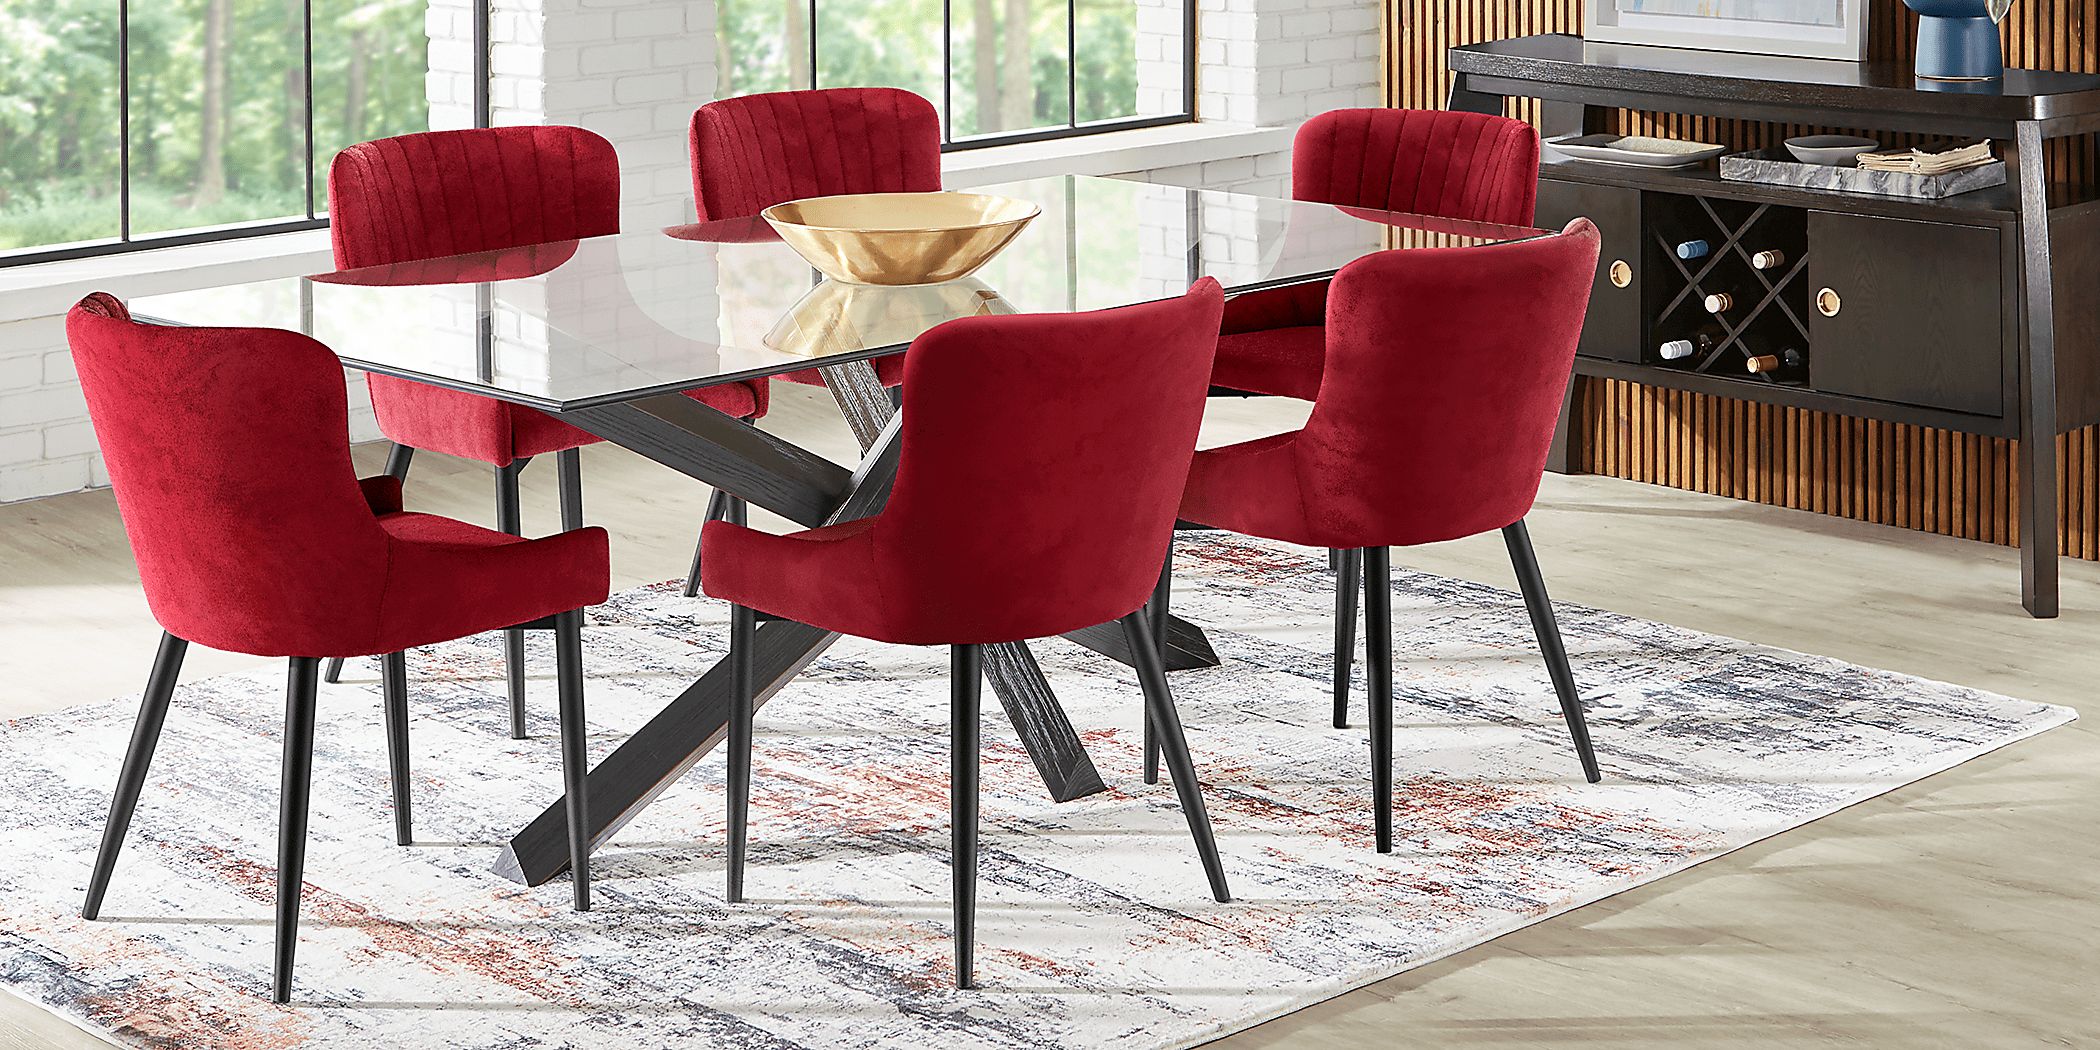 Hollybrooke Black 7 Pc Dining Room with Bordeaux Chairs